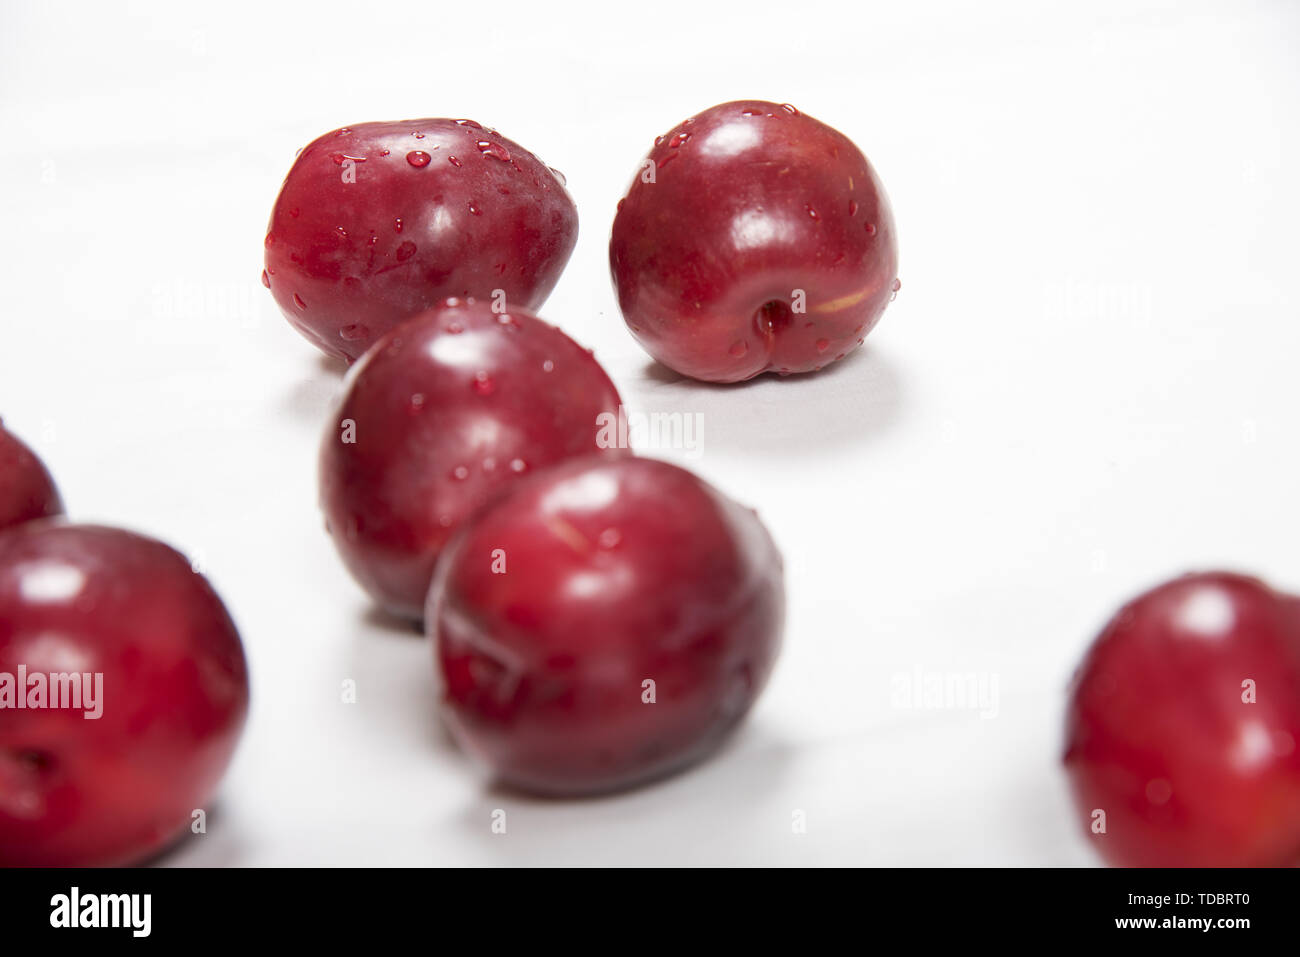 Casually laid red plum fruit on white background Stock Photo